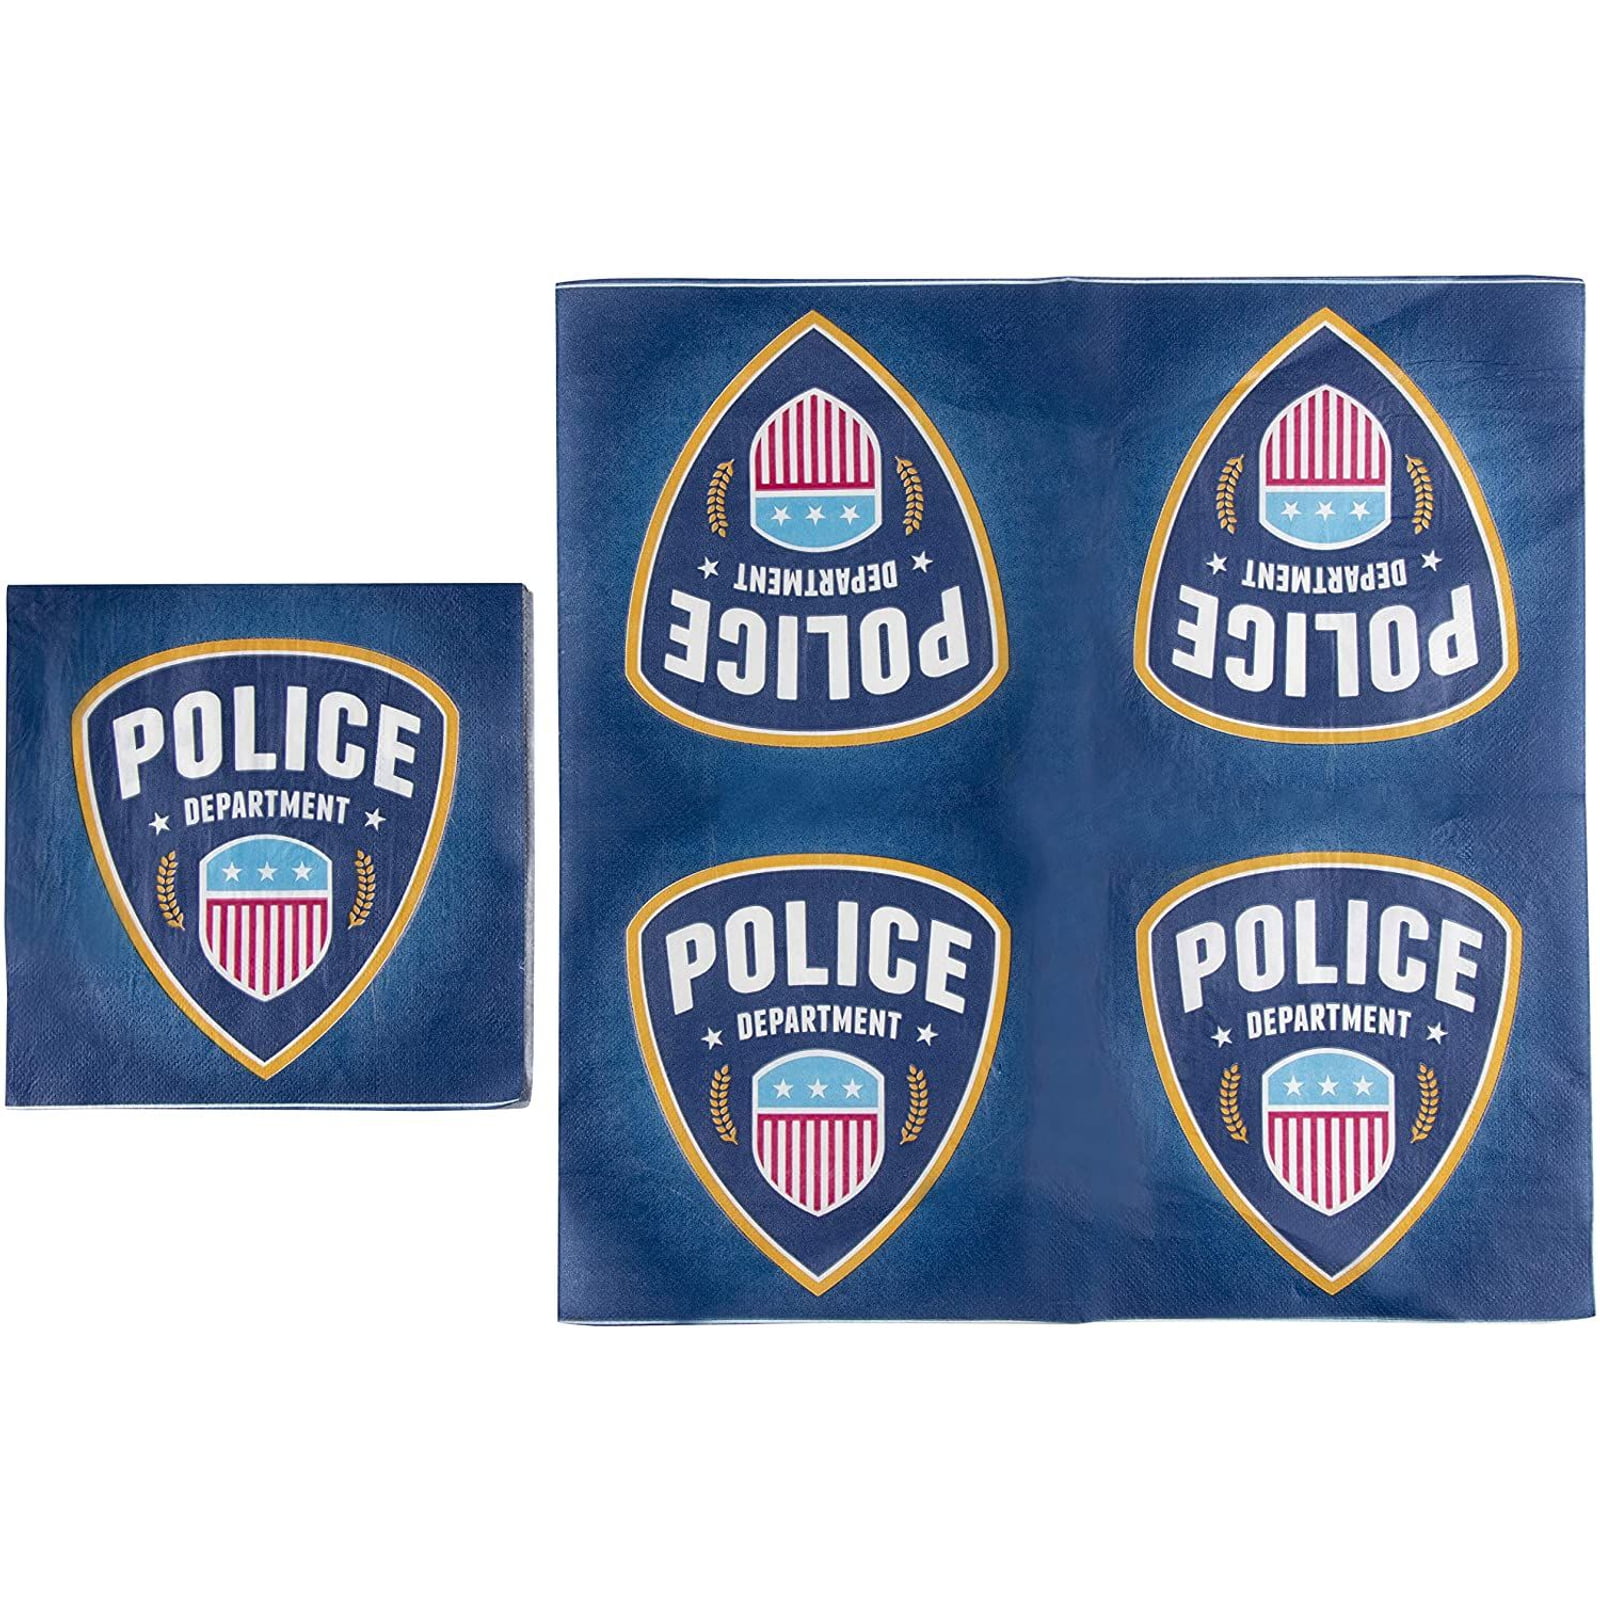 Serves 24 Napkins Spoons Forks Police Party Supplies for Kids Birthdays Includes Plastic Knives Cups Disposable Dinnerware Set Paper Plates 